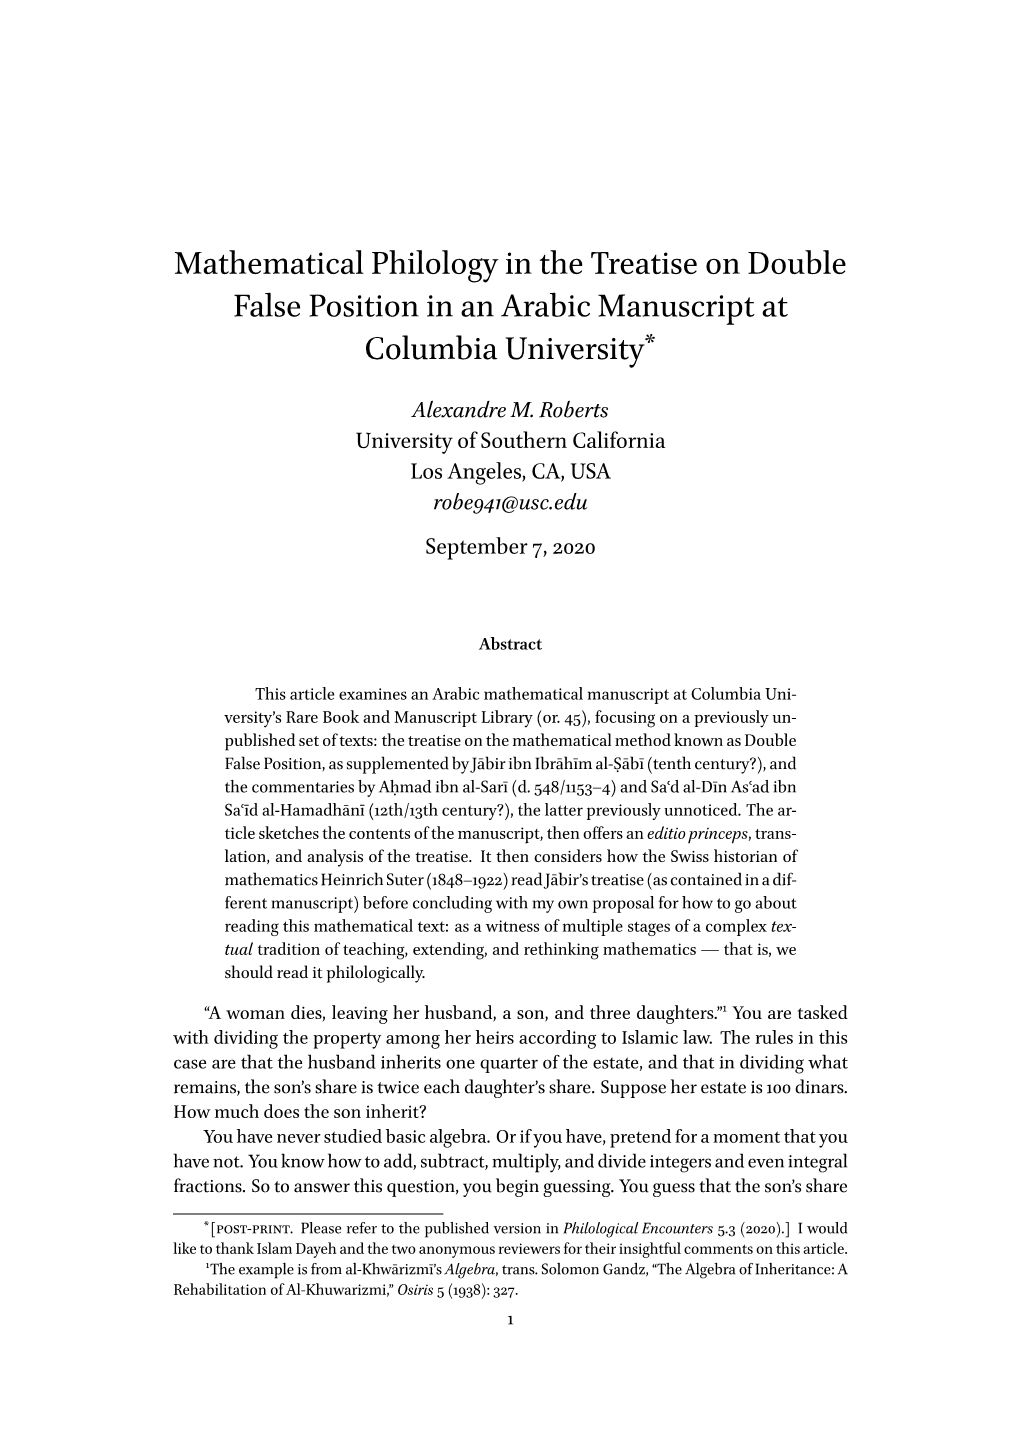 Mathematical Philology in the Treatise on Double False Position in an Arabic Manuscript at Columbia University*